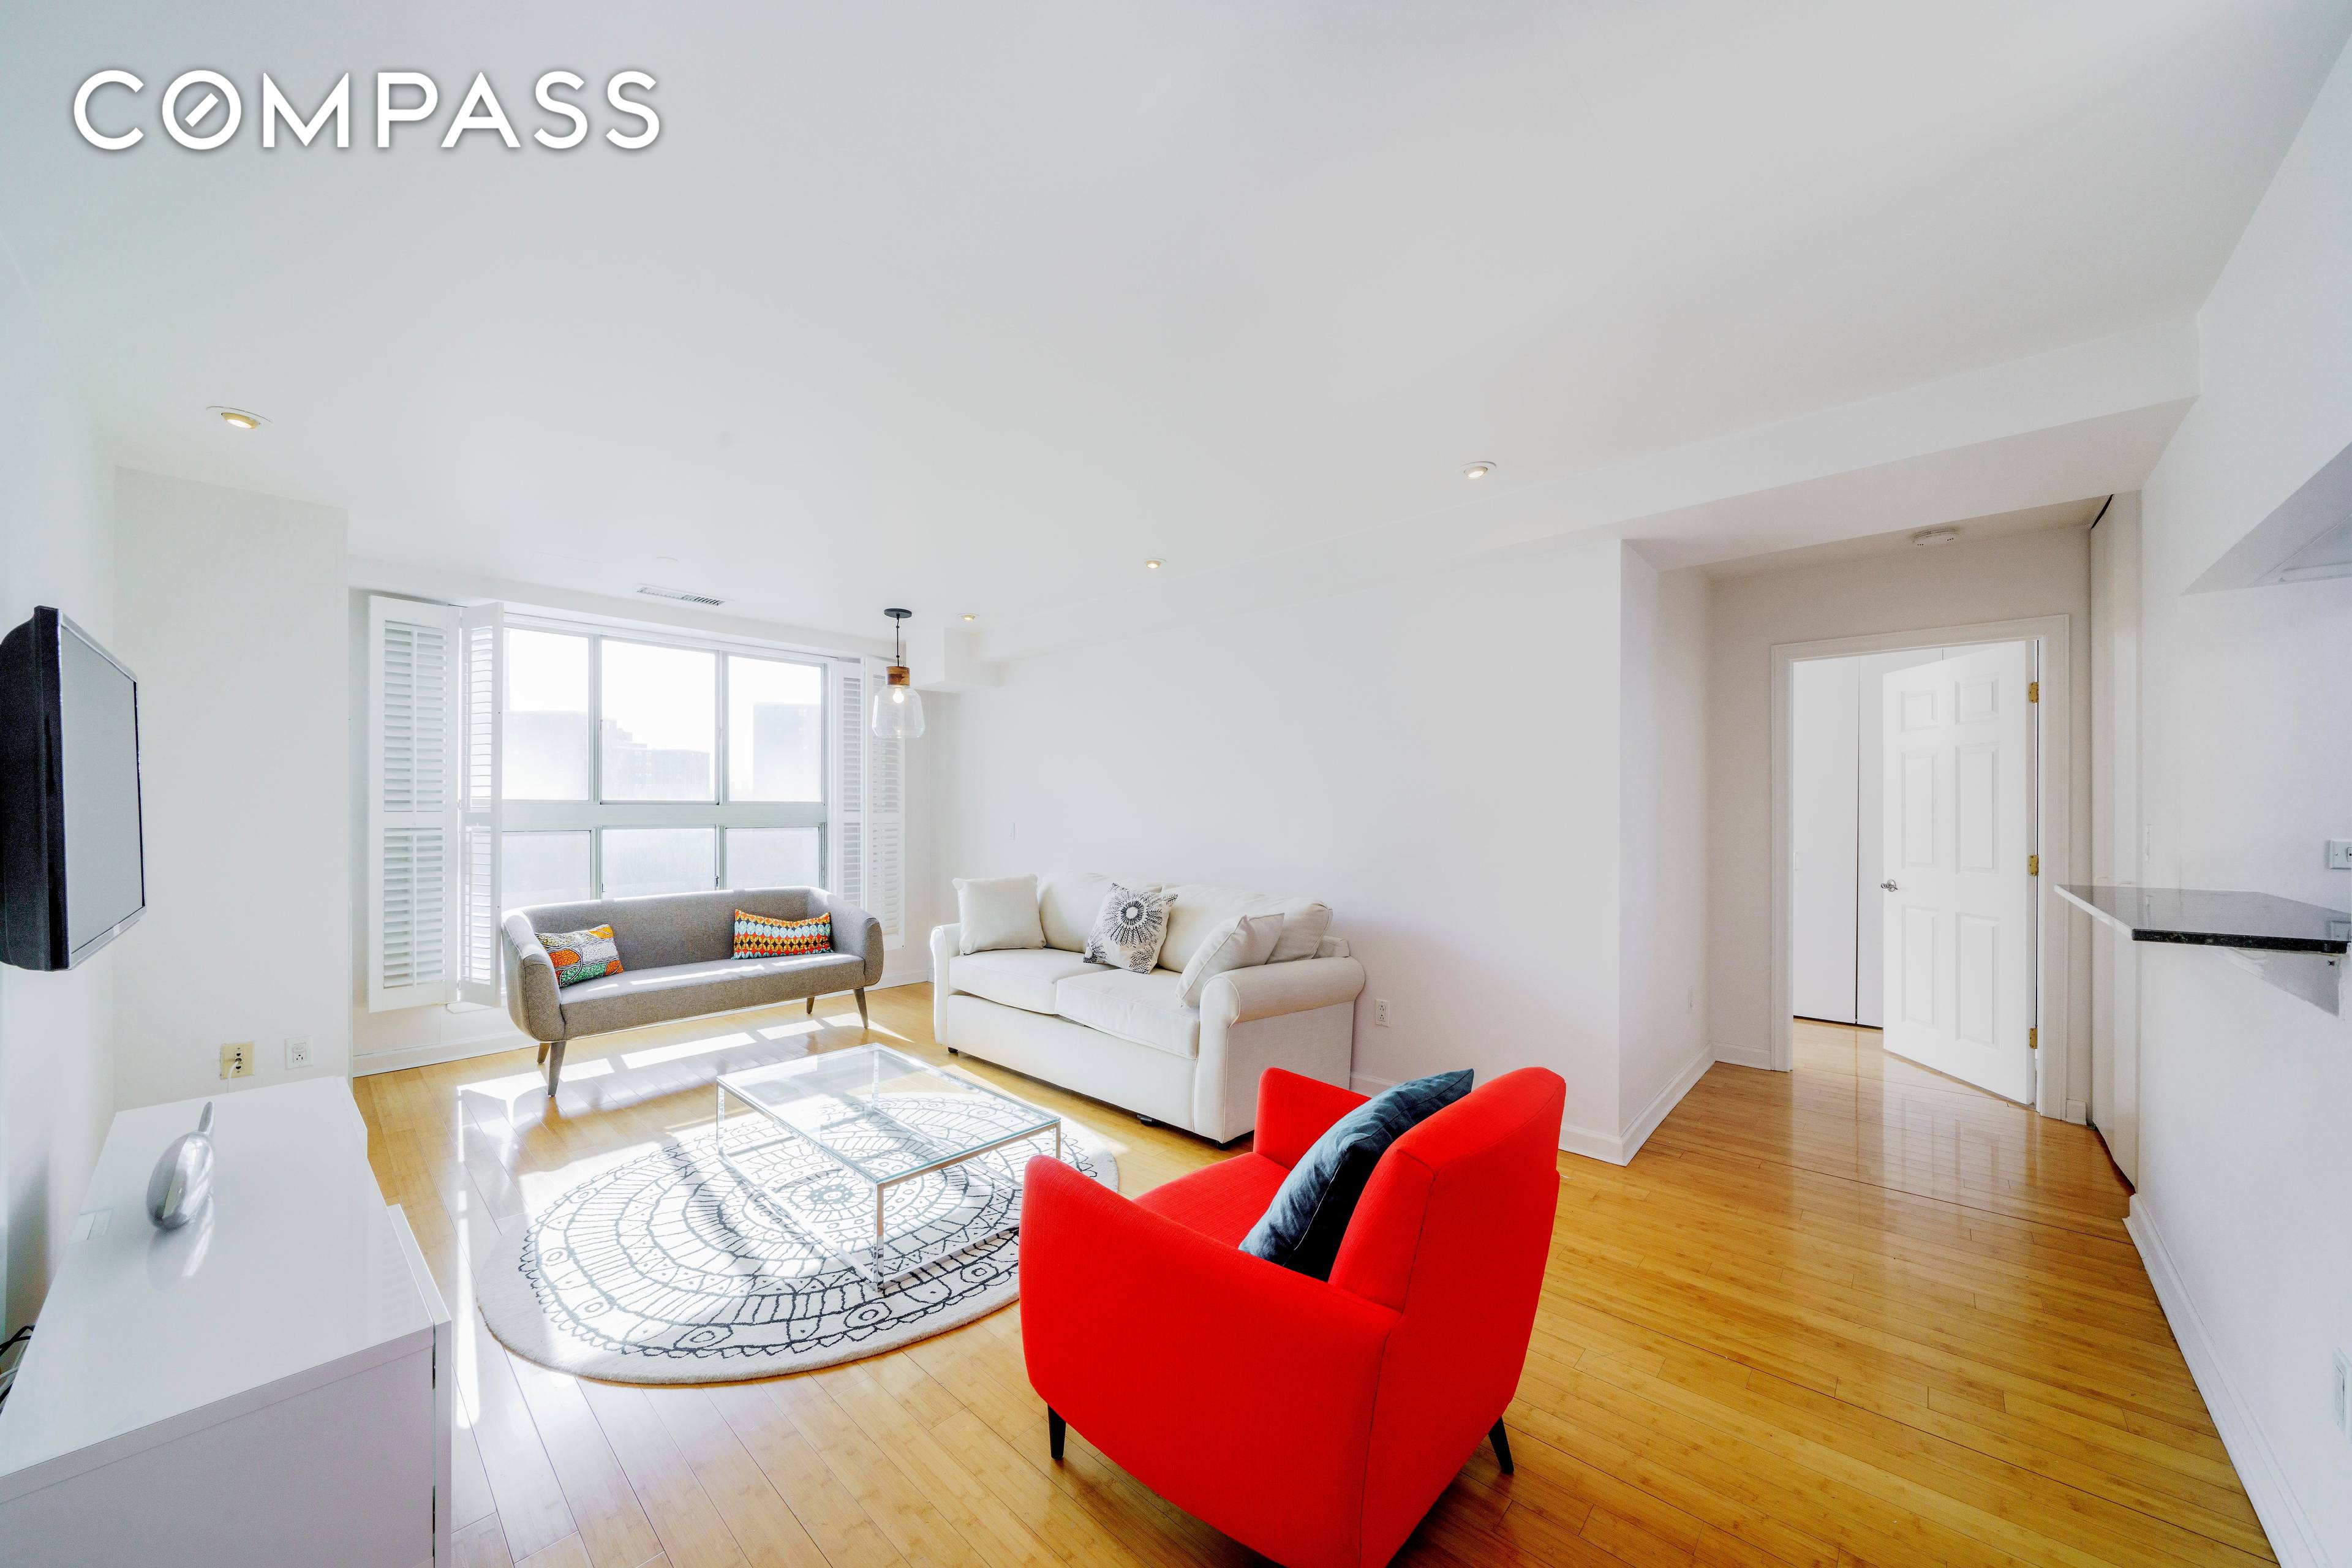 Furnished South facing split 2 bed, 2 bath home on the top floor of a doorman condo situated on Fifth Avenue and west 116th Street.